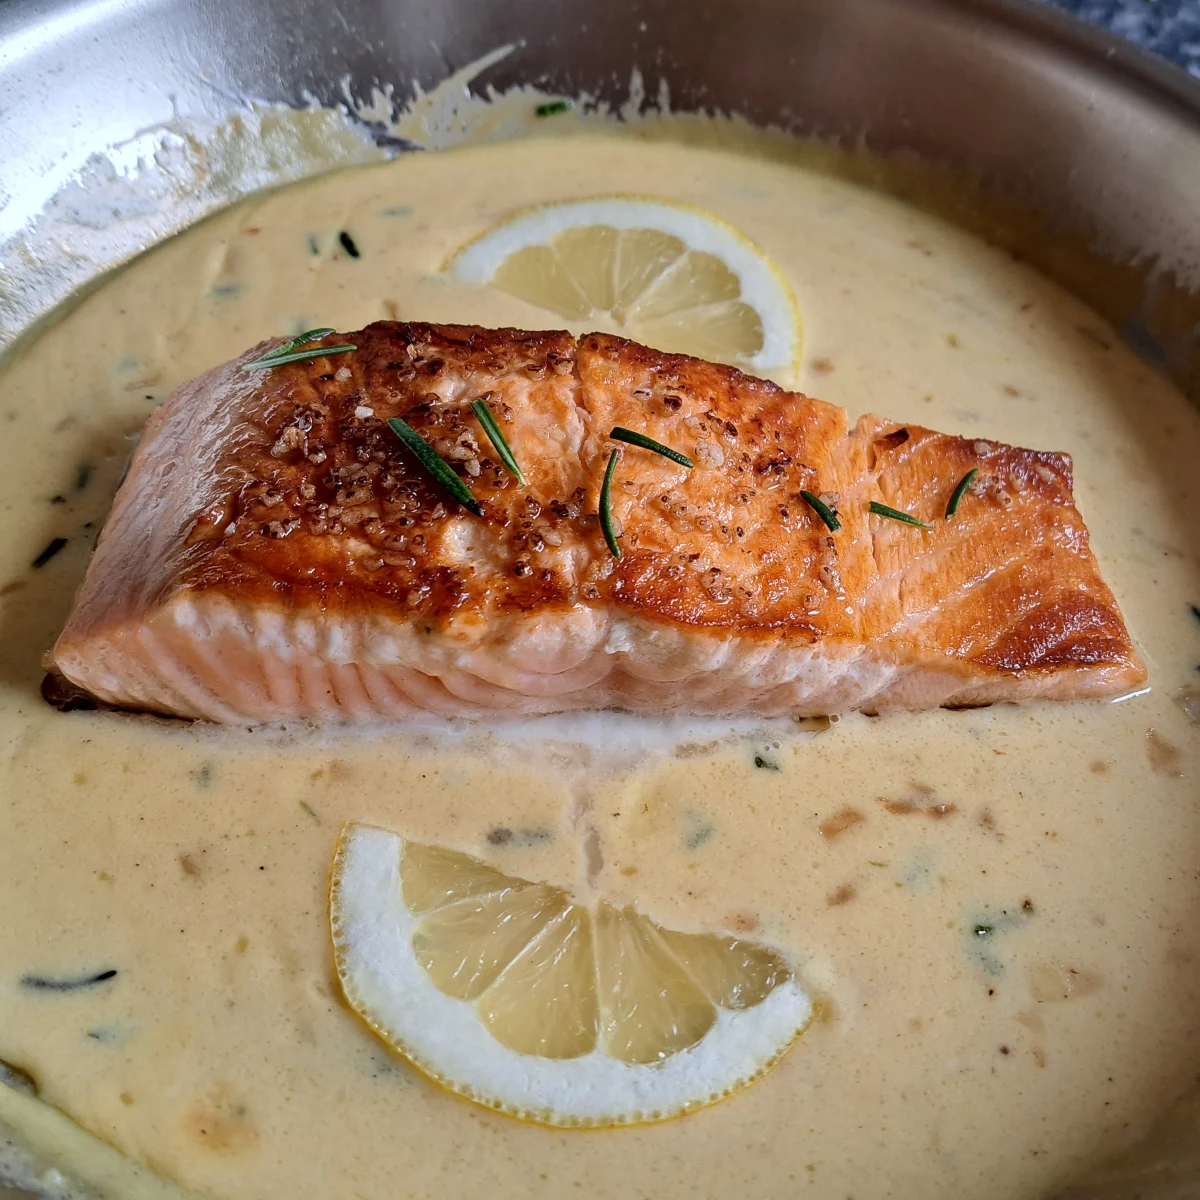 Pan-fried salmon fillet nestled in a rich and creamy orange sauce, with a vibrant blend of orange juice, mustard, and cranberry flavors, garnished with fresh rosemary and lemon slices. The salmon is perfectly seared, creating a visually appealing dish with a balance of colors and textures.